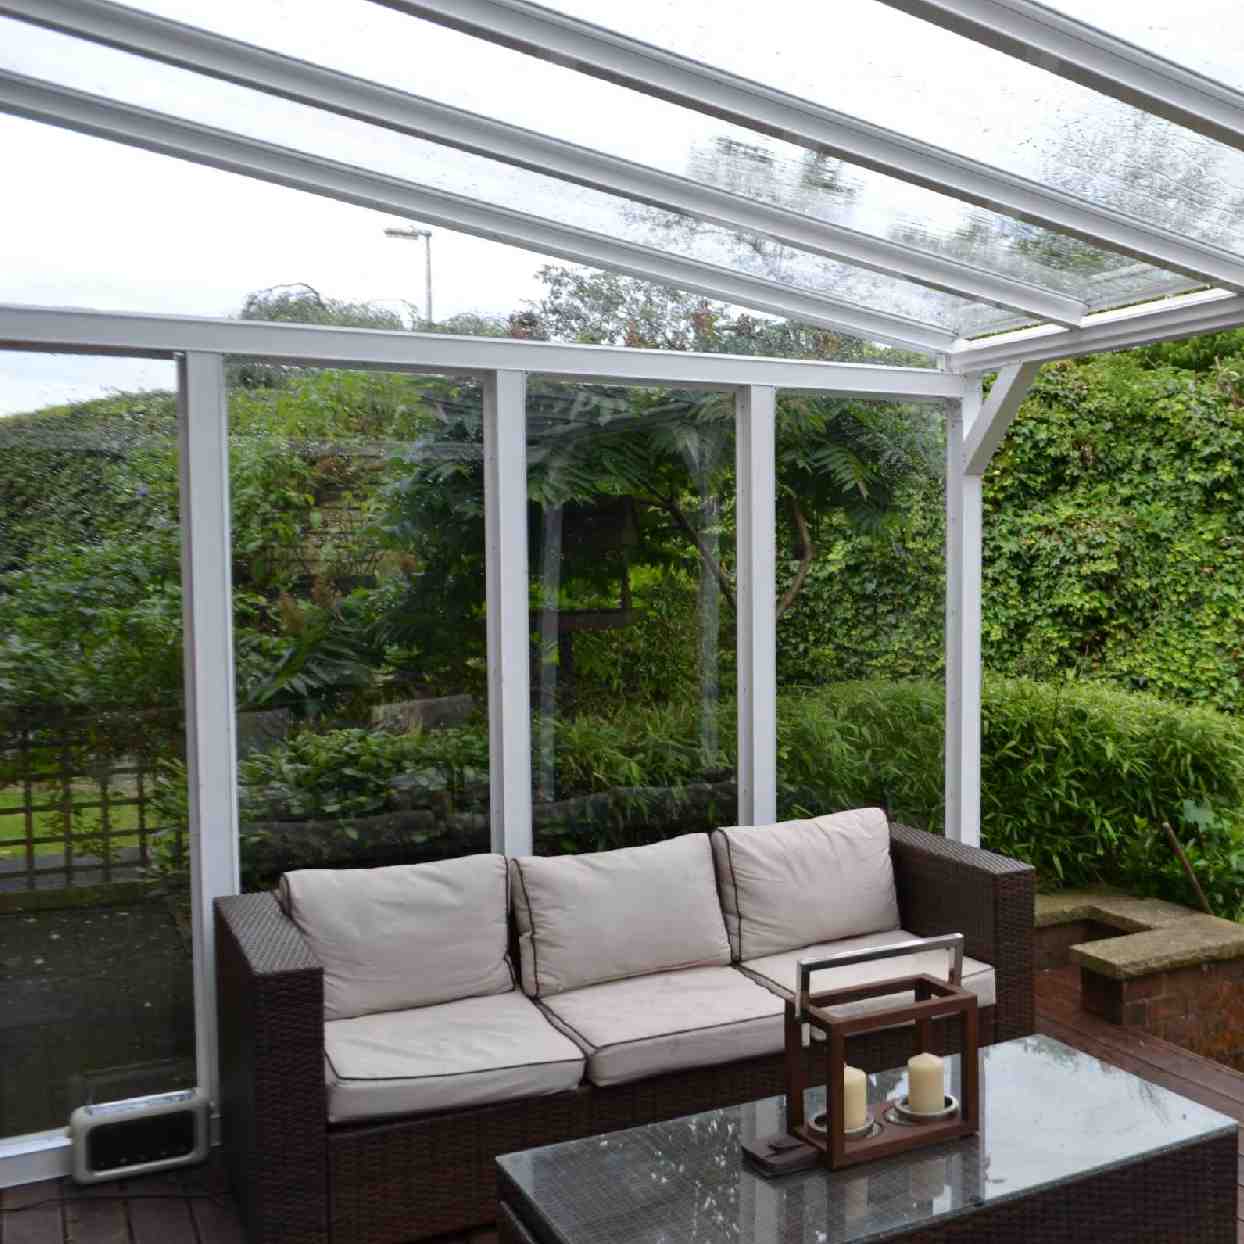 Buy Omega Verandah White with 6mm Glass Clear Plate Polycarbonate Glazing - 9.8m (W) x 1.5m (P), (5) Supporting Posts online today